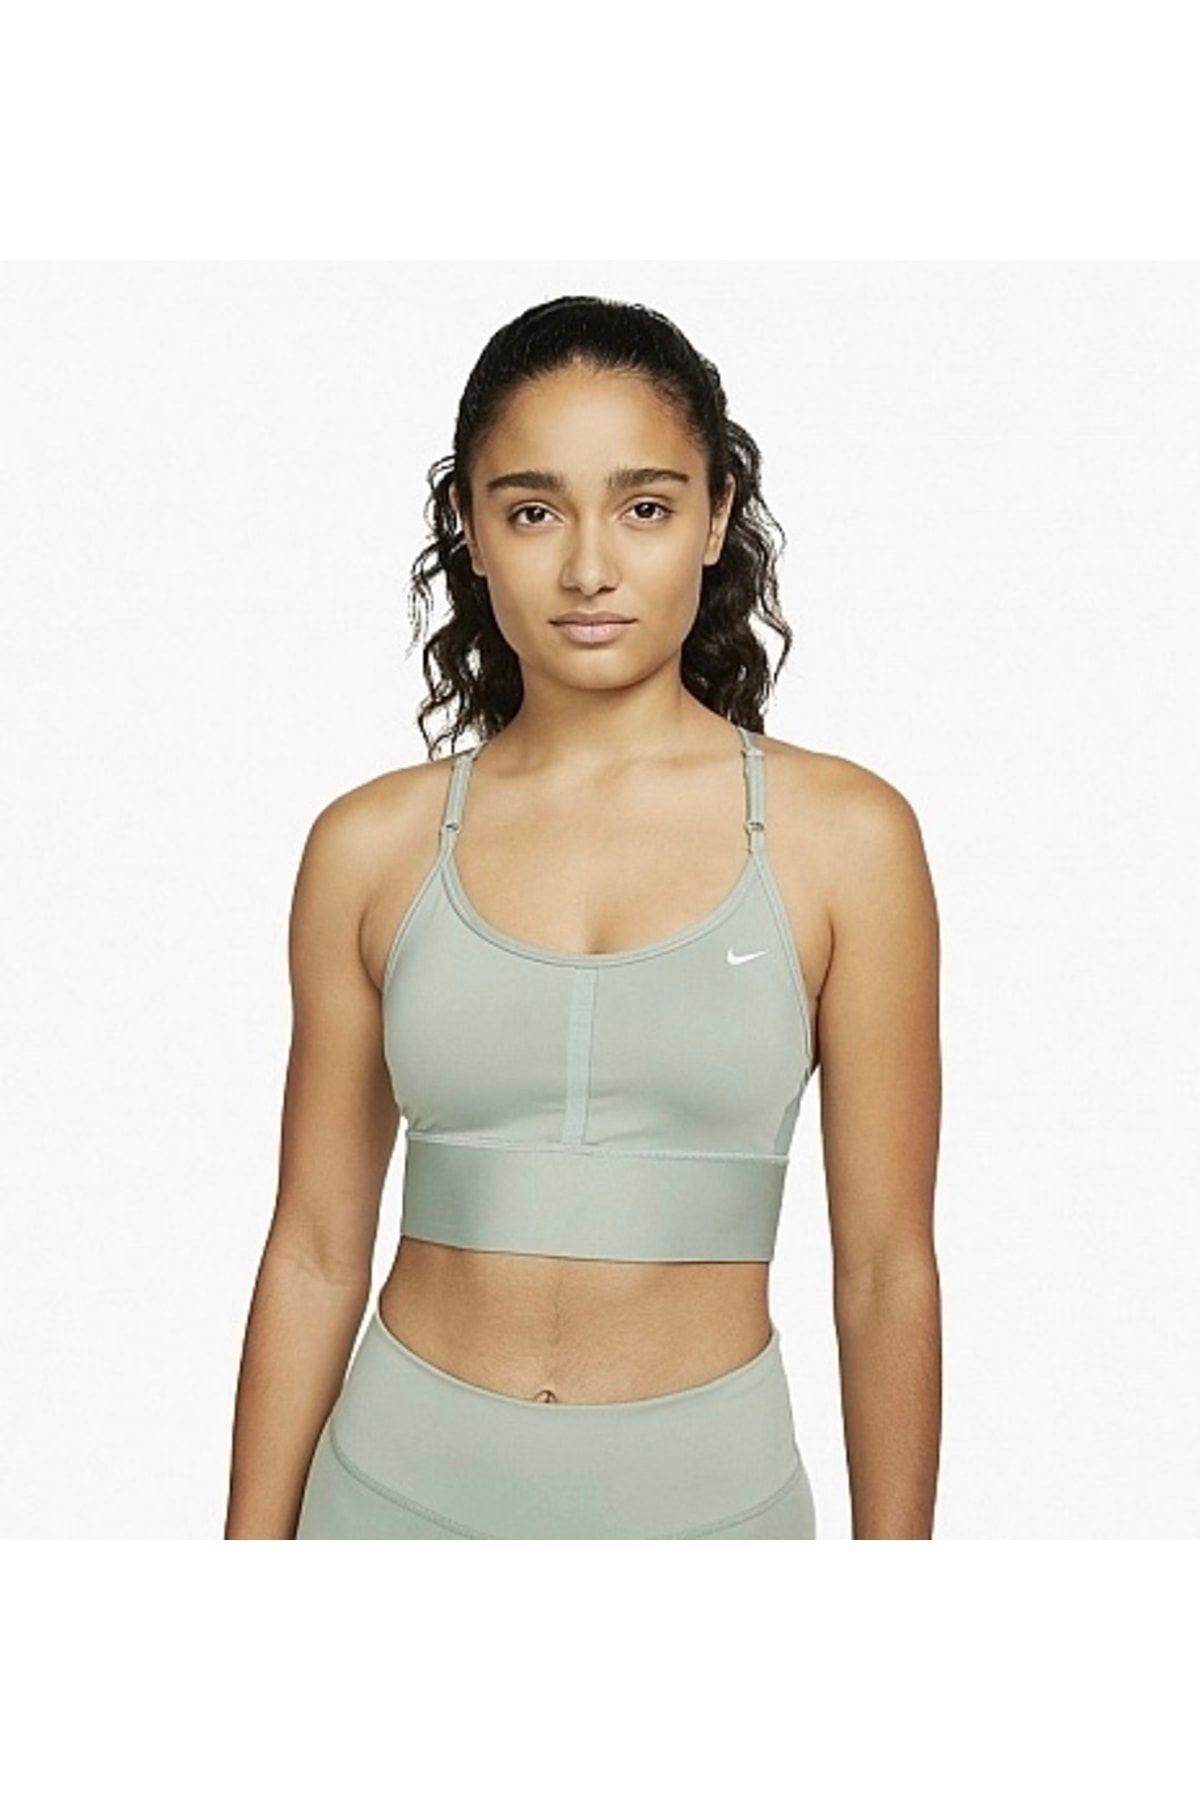 Nike Dri-fit Indy Lightly Supported Padded Long Women's Sports Bra